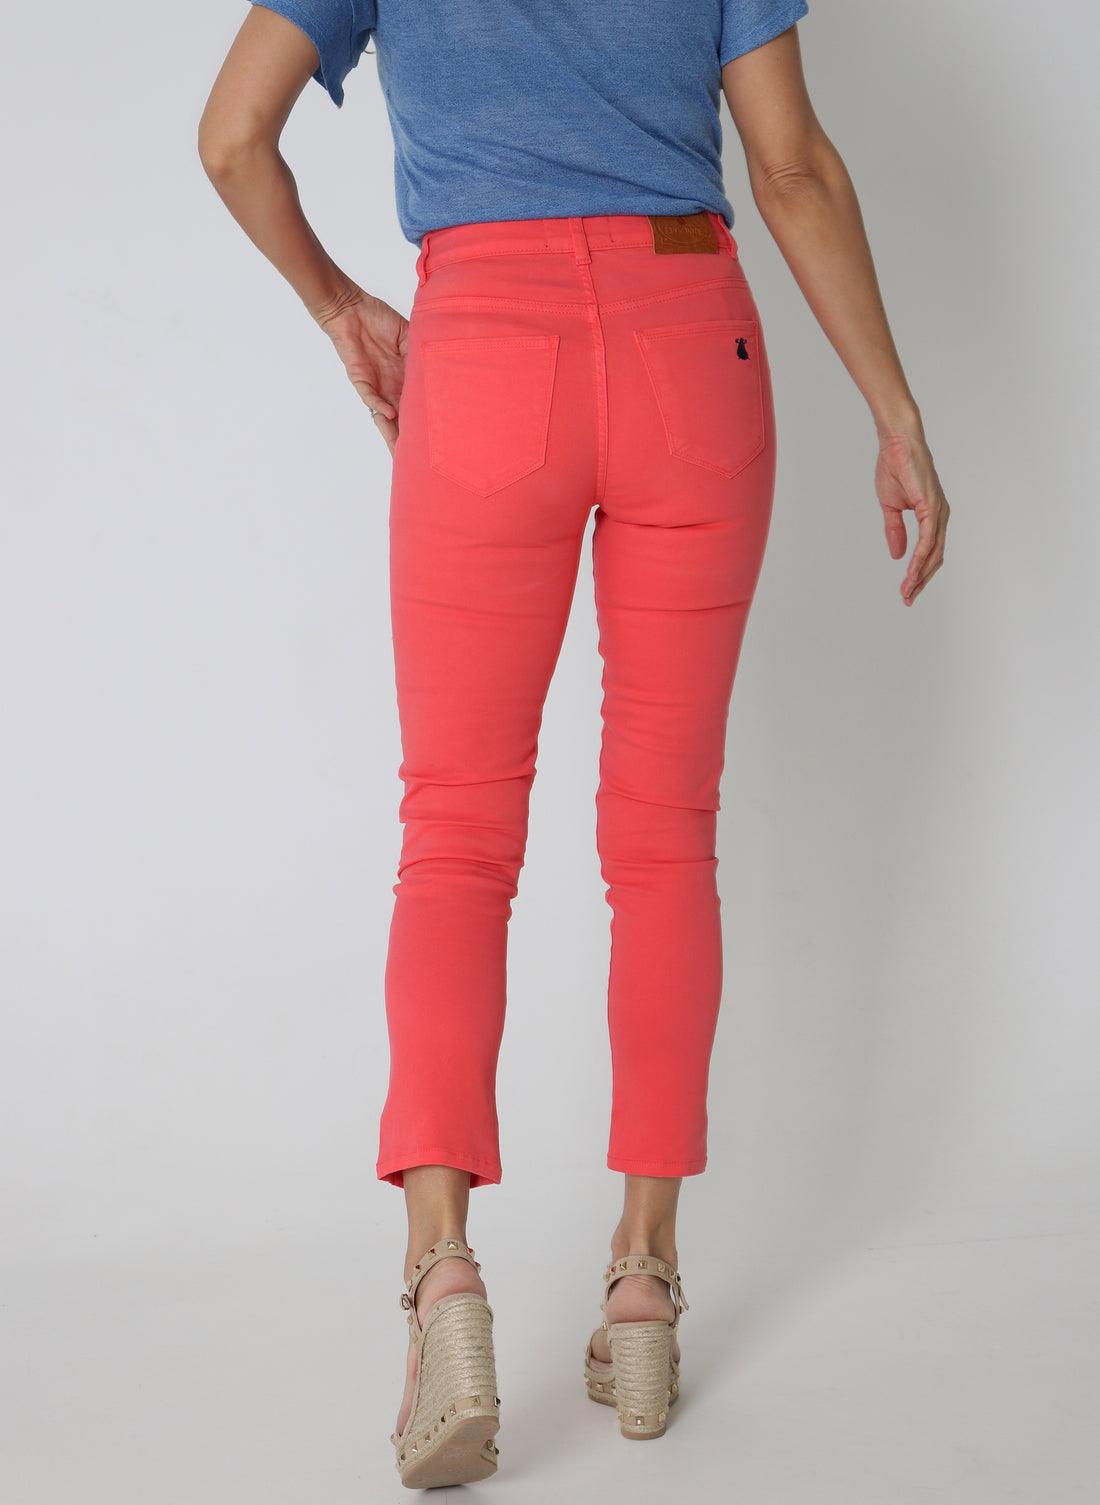 Twill Corail Buttons Femme Pant